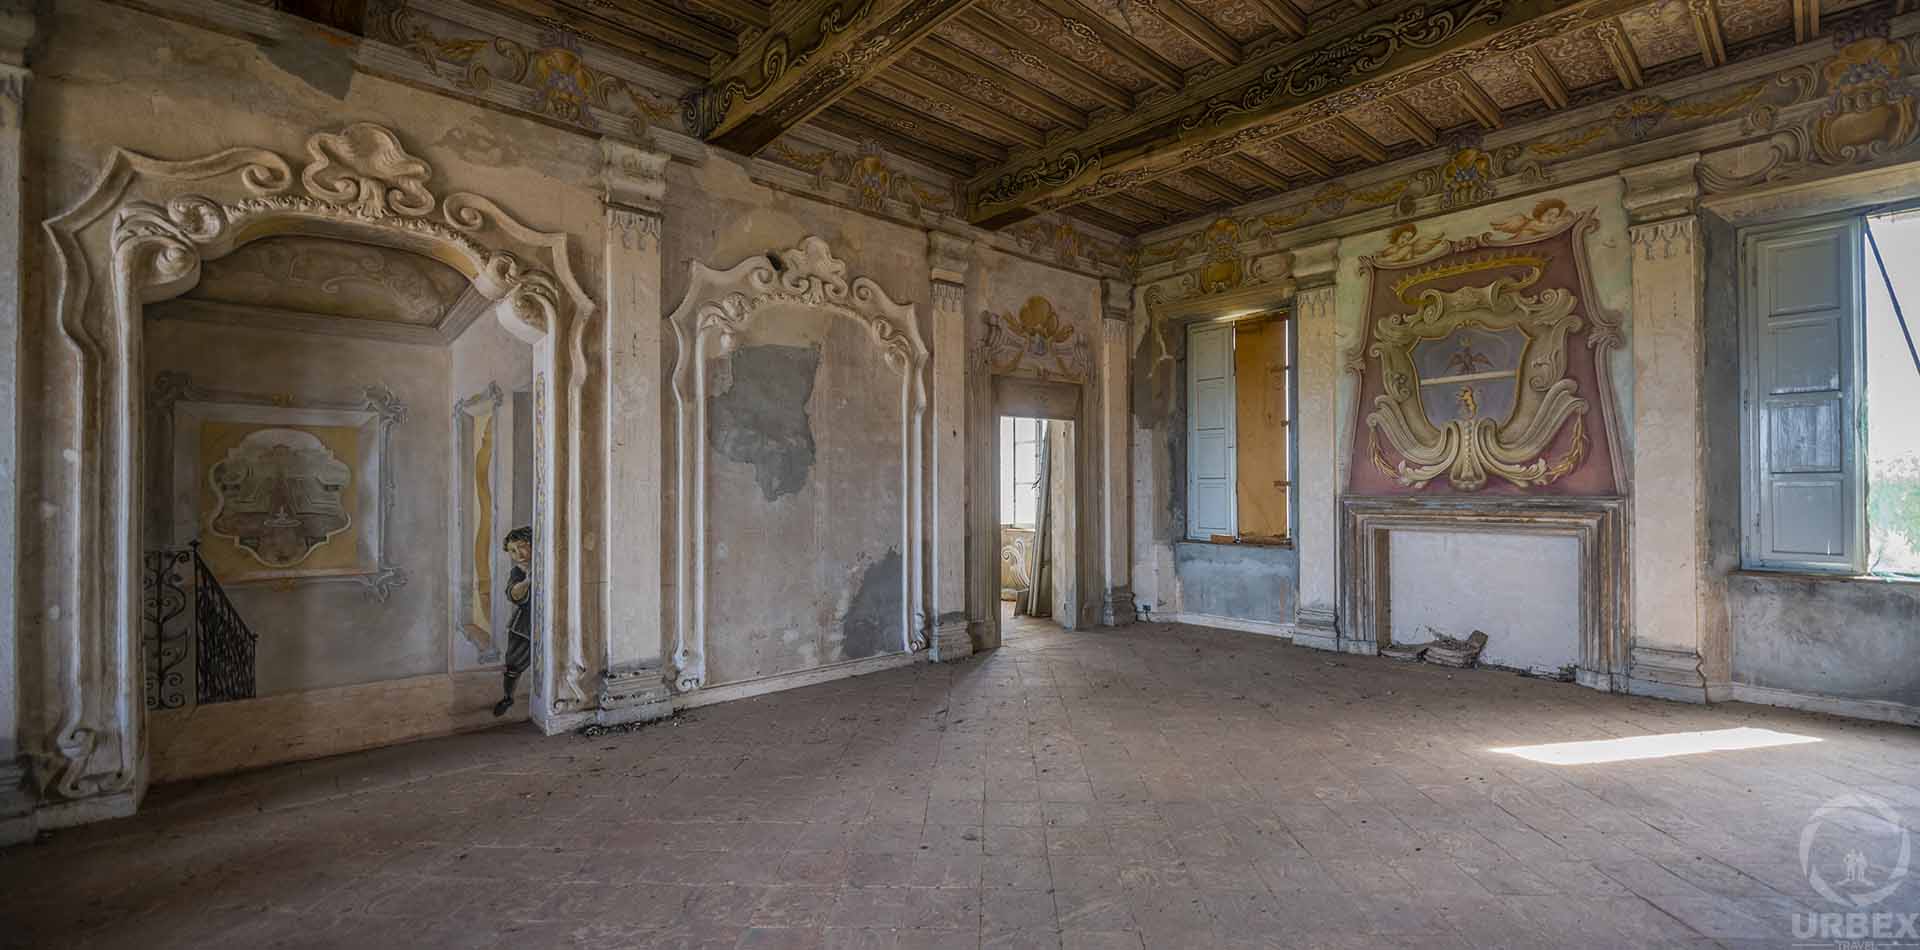 Urbex discovery in Italy